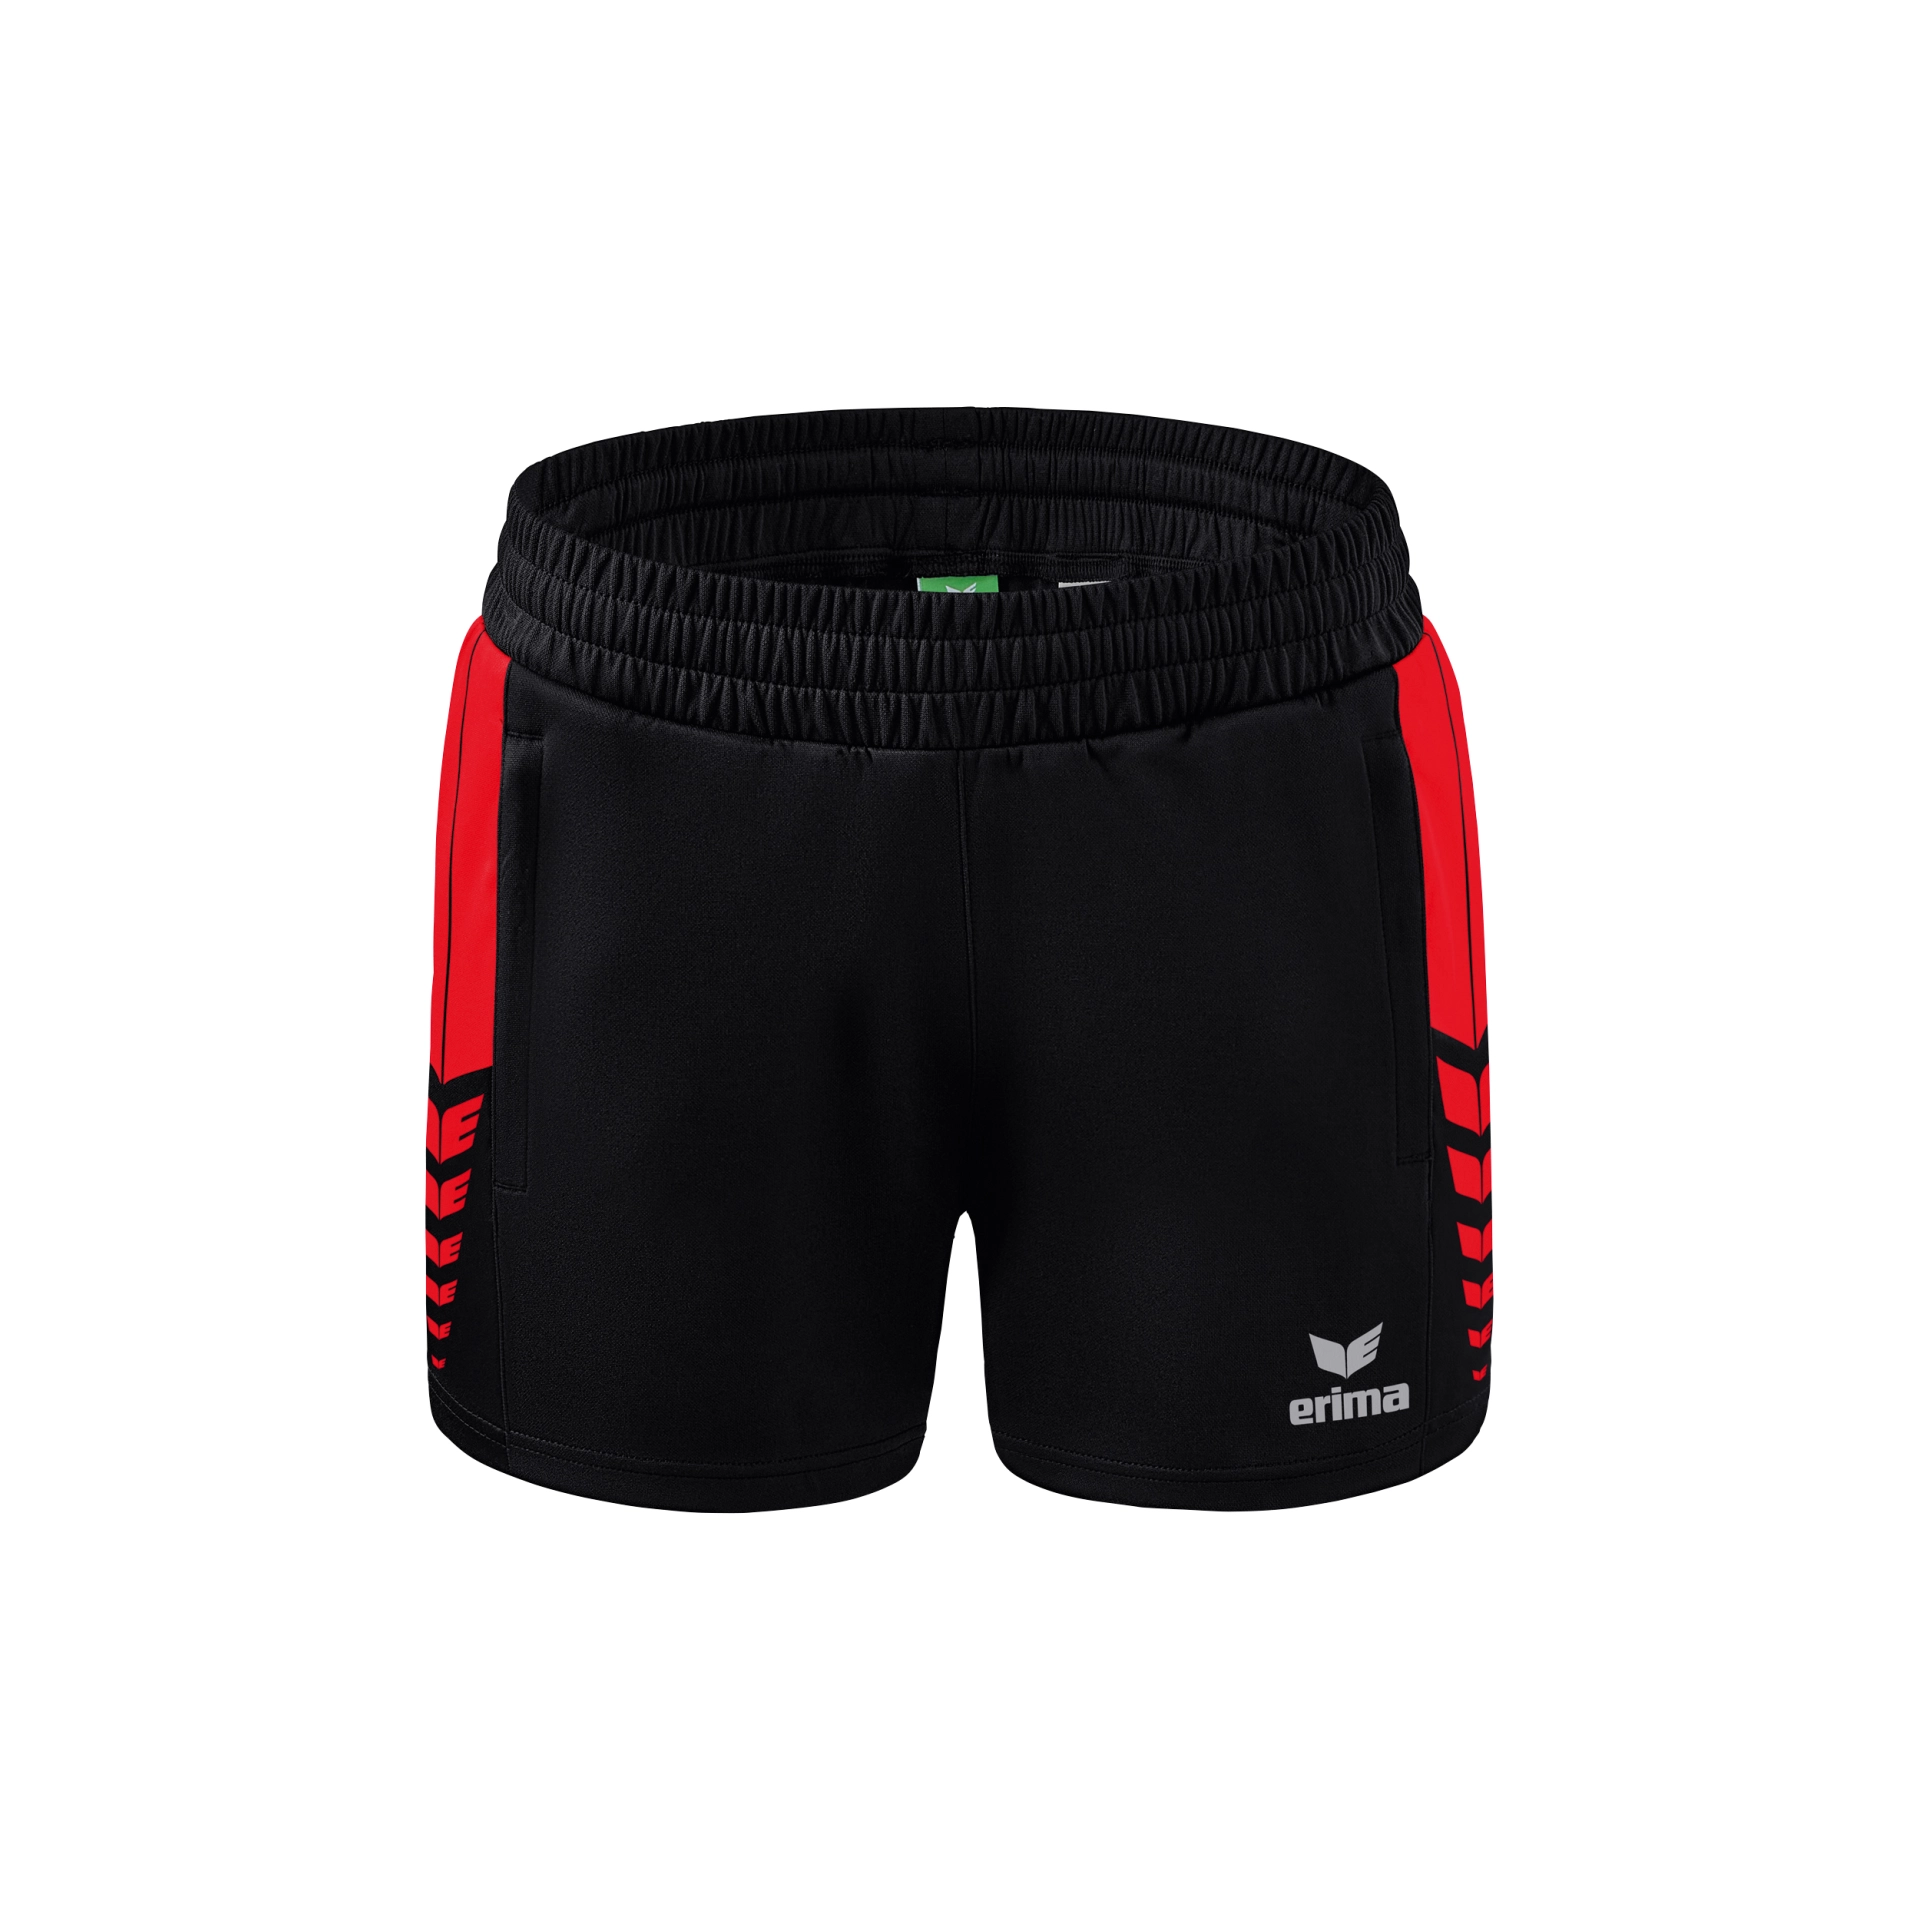 ERIMA Six_Wings_Worker_Shorts 1152201 950250 black/red